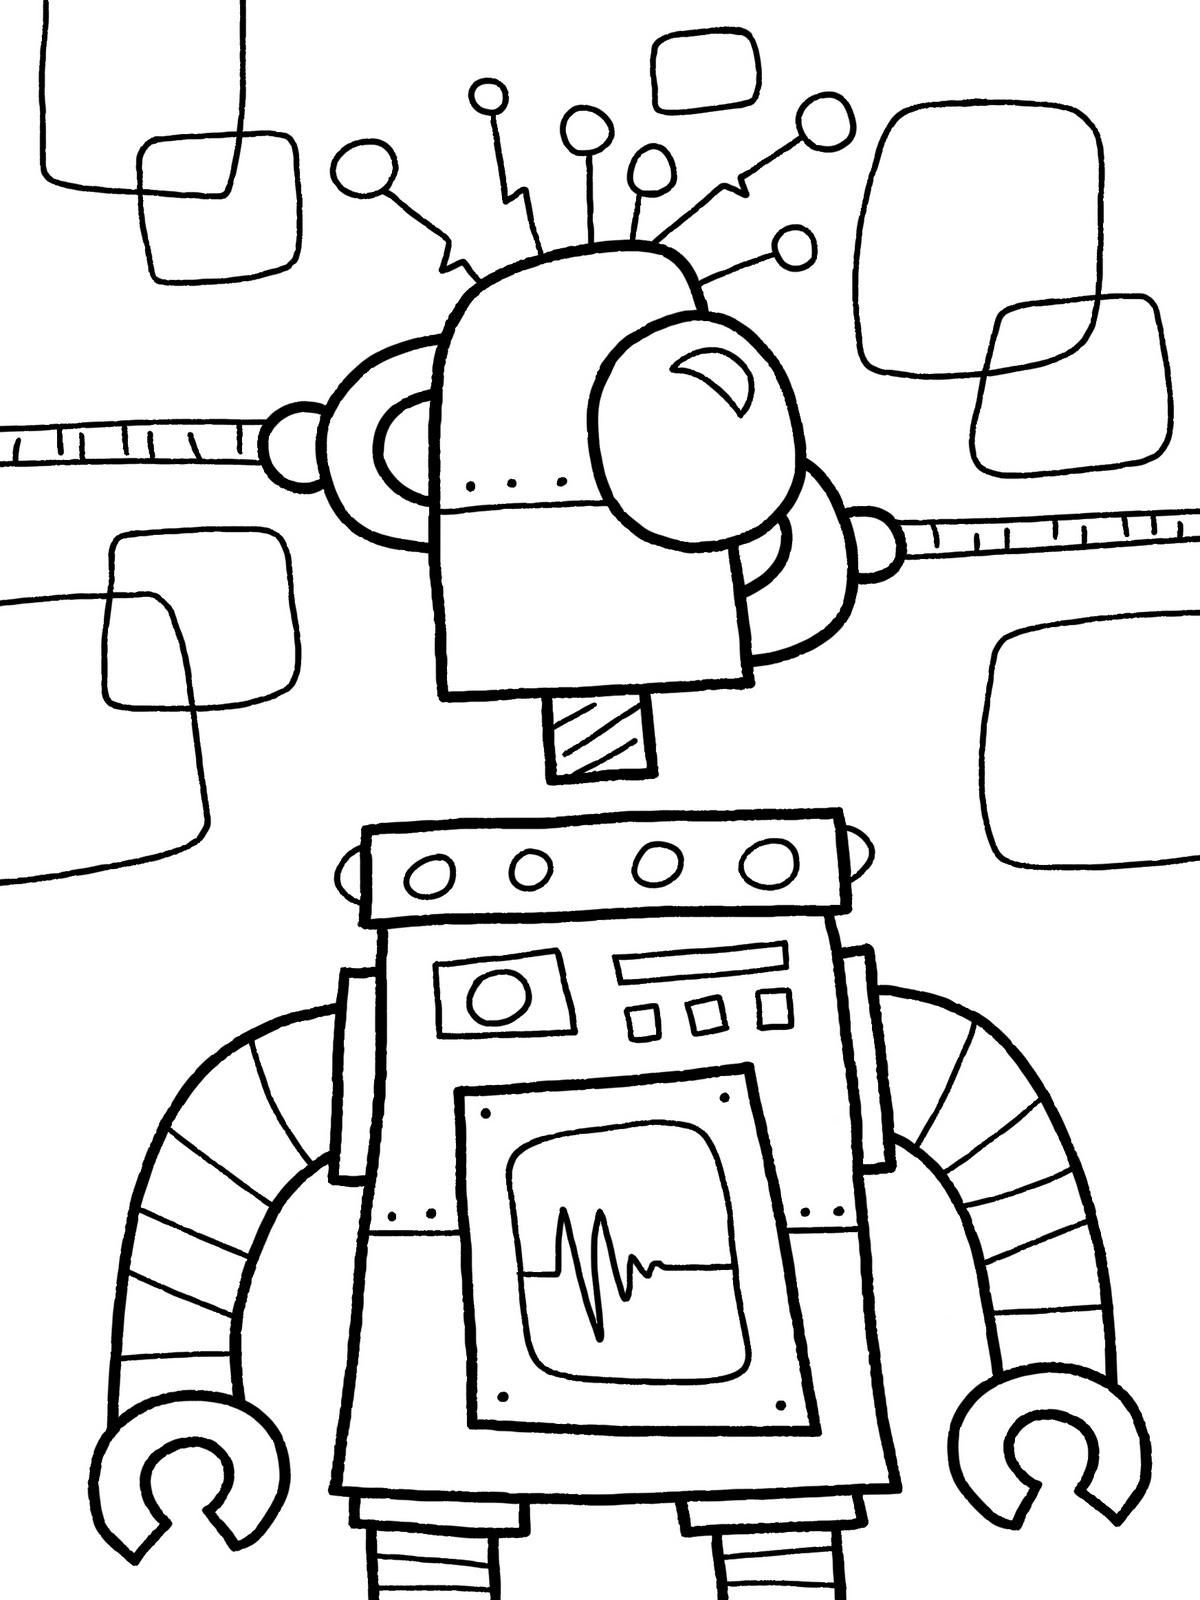 Coloring Pages : Free Printable Robot Coloring For Kids Colouring ...